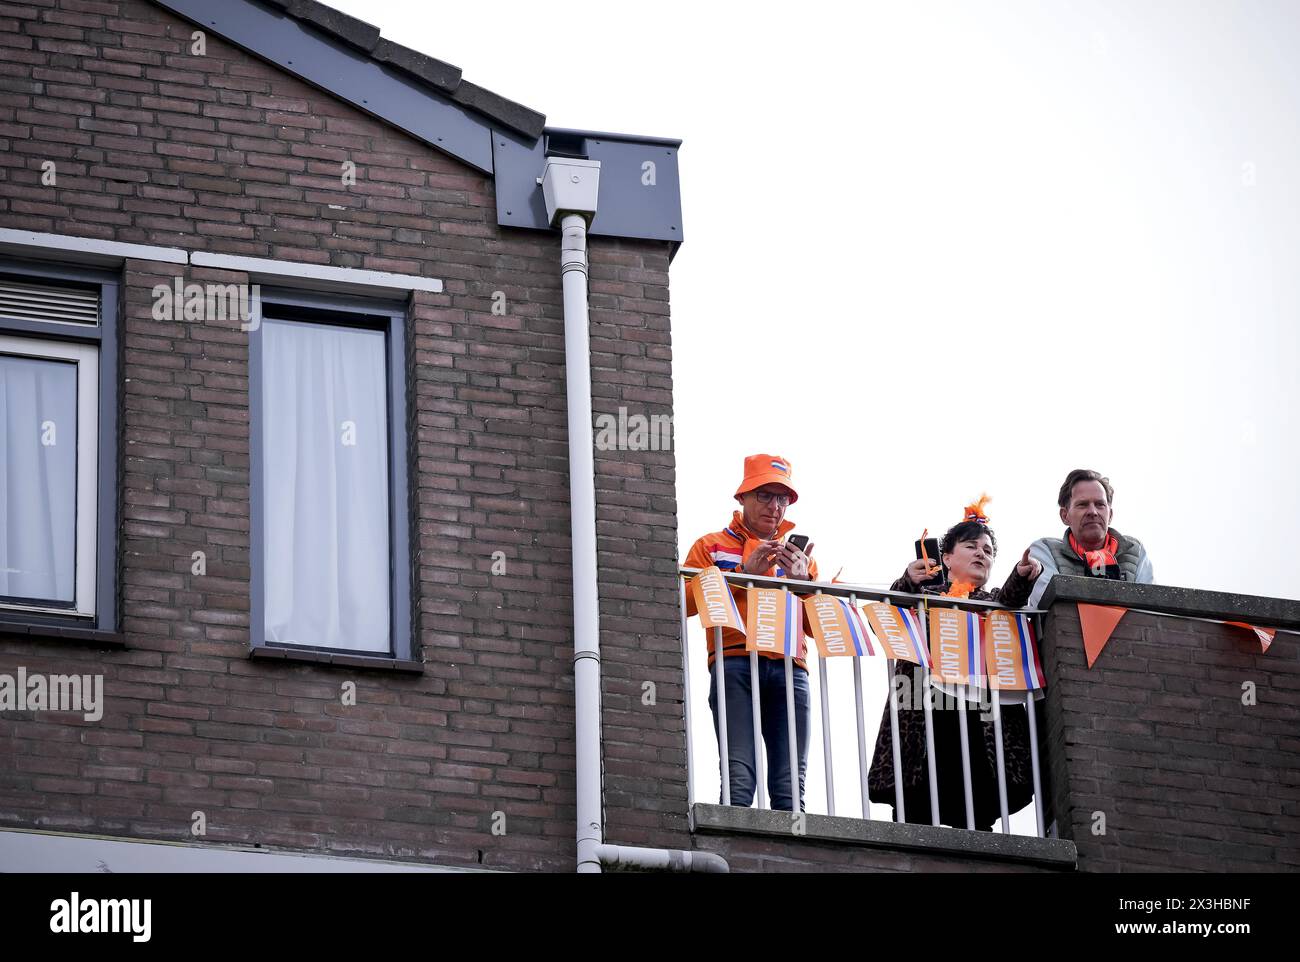 EMMEN - The first Orange fans have taken a place along the route that the royal family takes through the center of Emmen. ANP FREEK VAN DEN BERGH netherlands out - belgium out Stock Photo